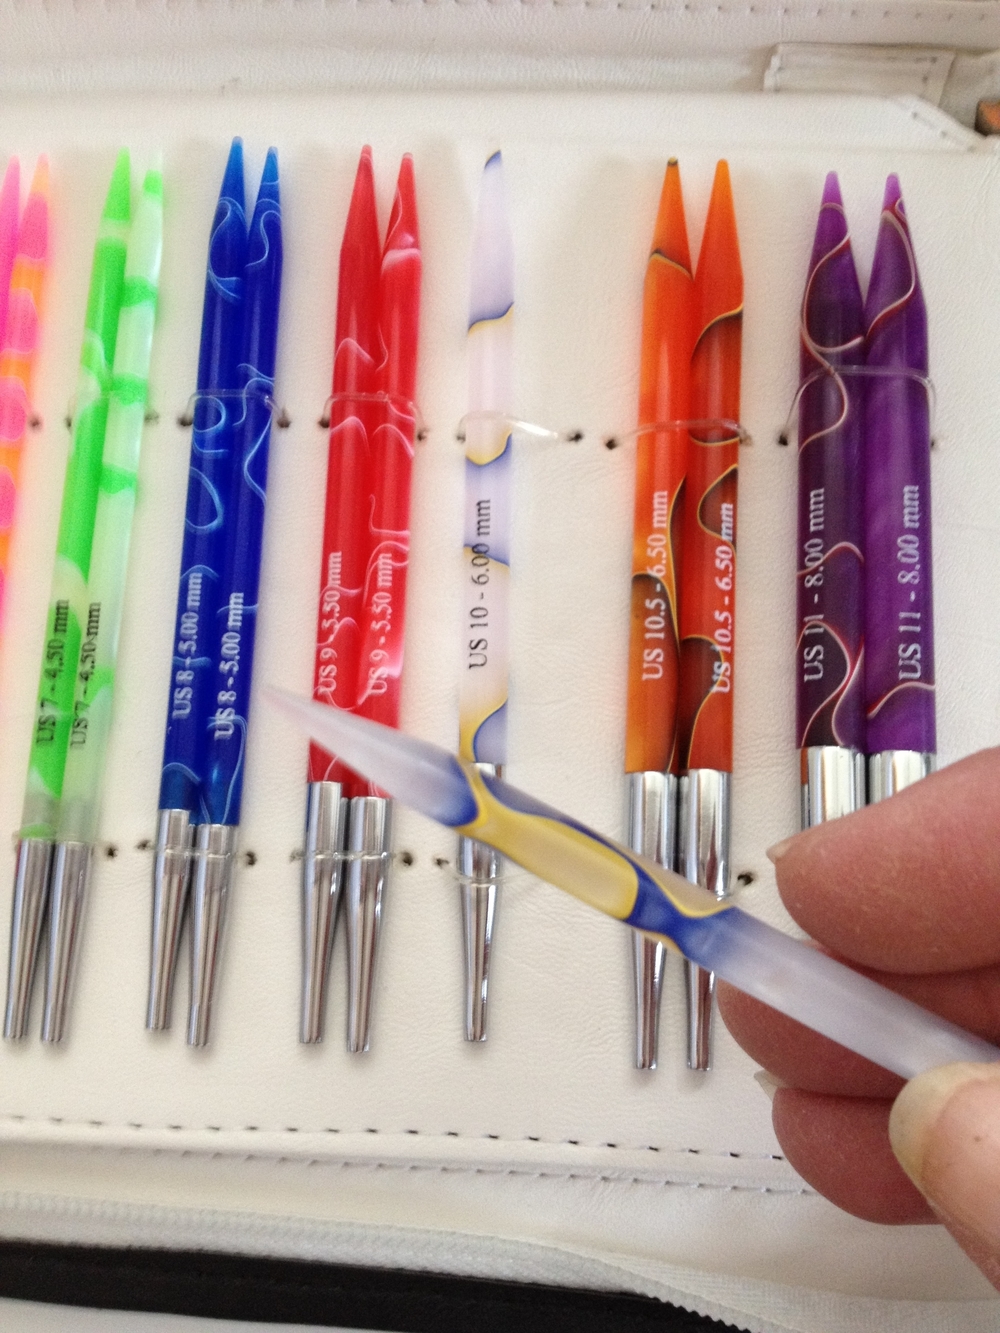 Knitters Pride MARBLZ Interchangeable Needle Set Review — Blog.NobleKnits